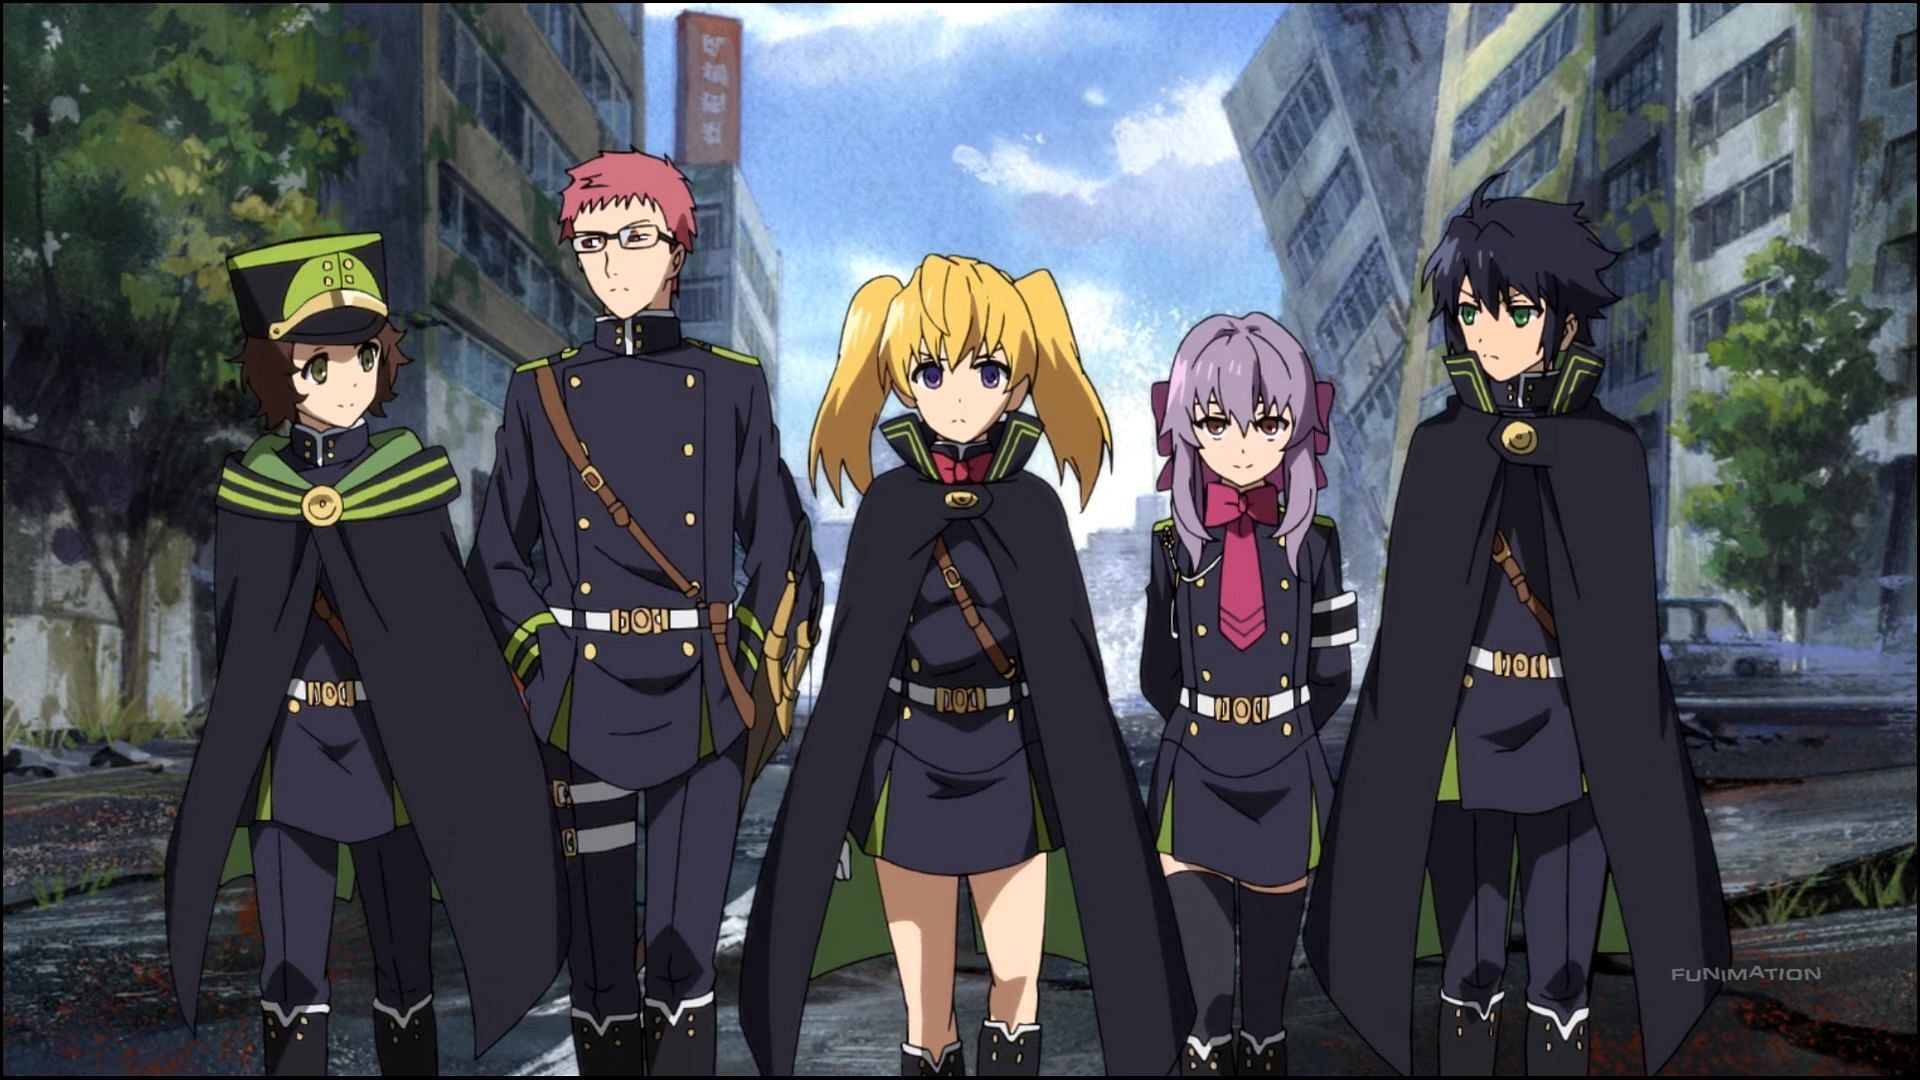 Seraph of the End: Seraph of the End season 3: Will the dark